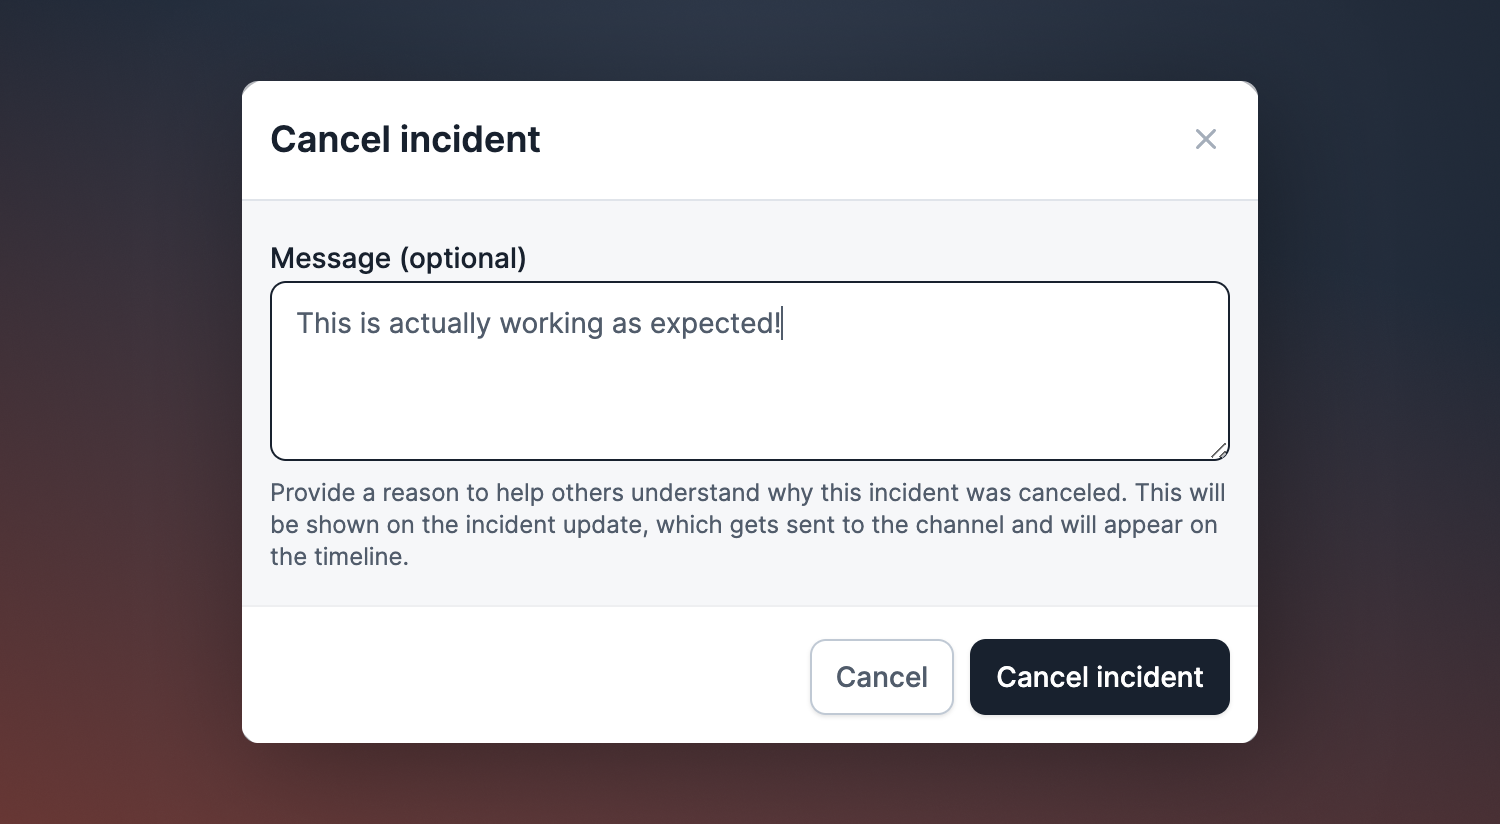 Canceling an incident